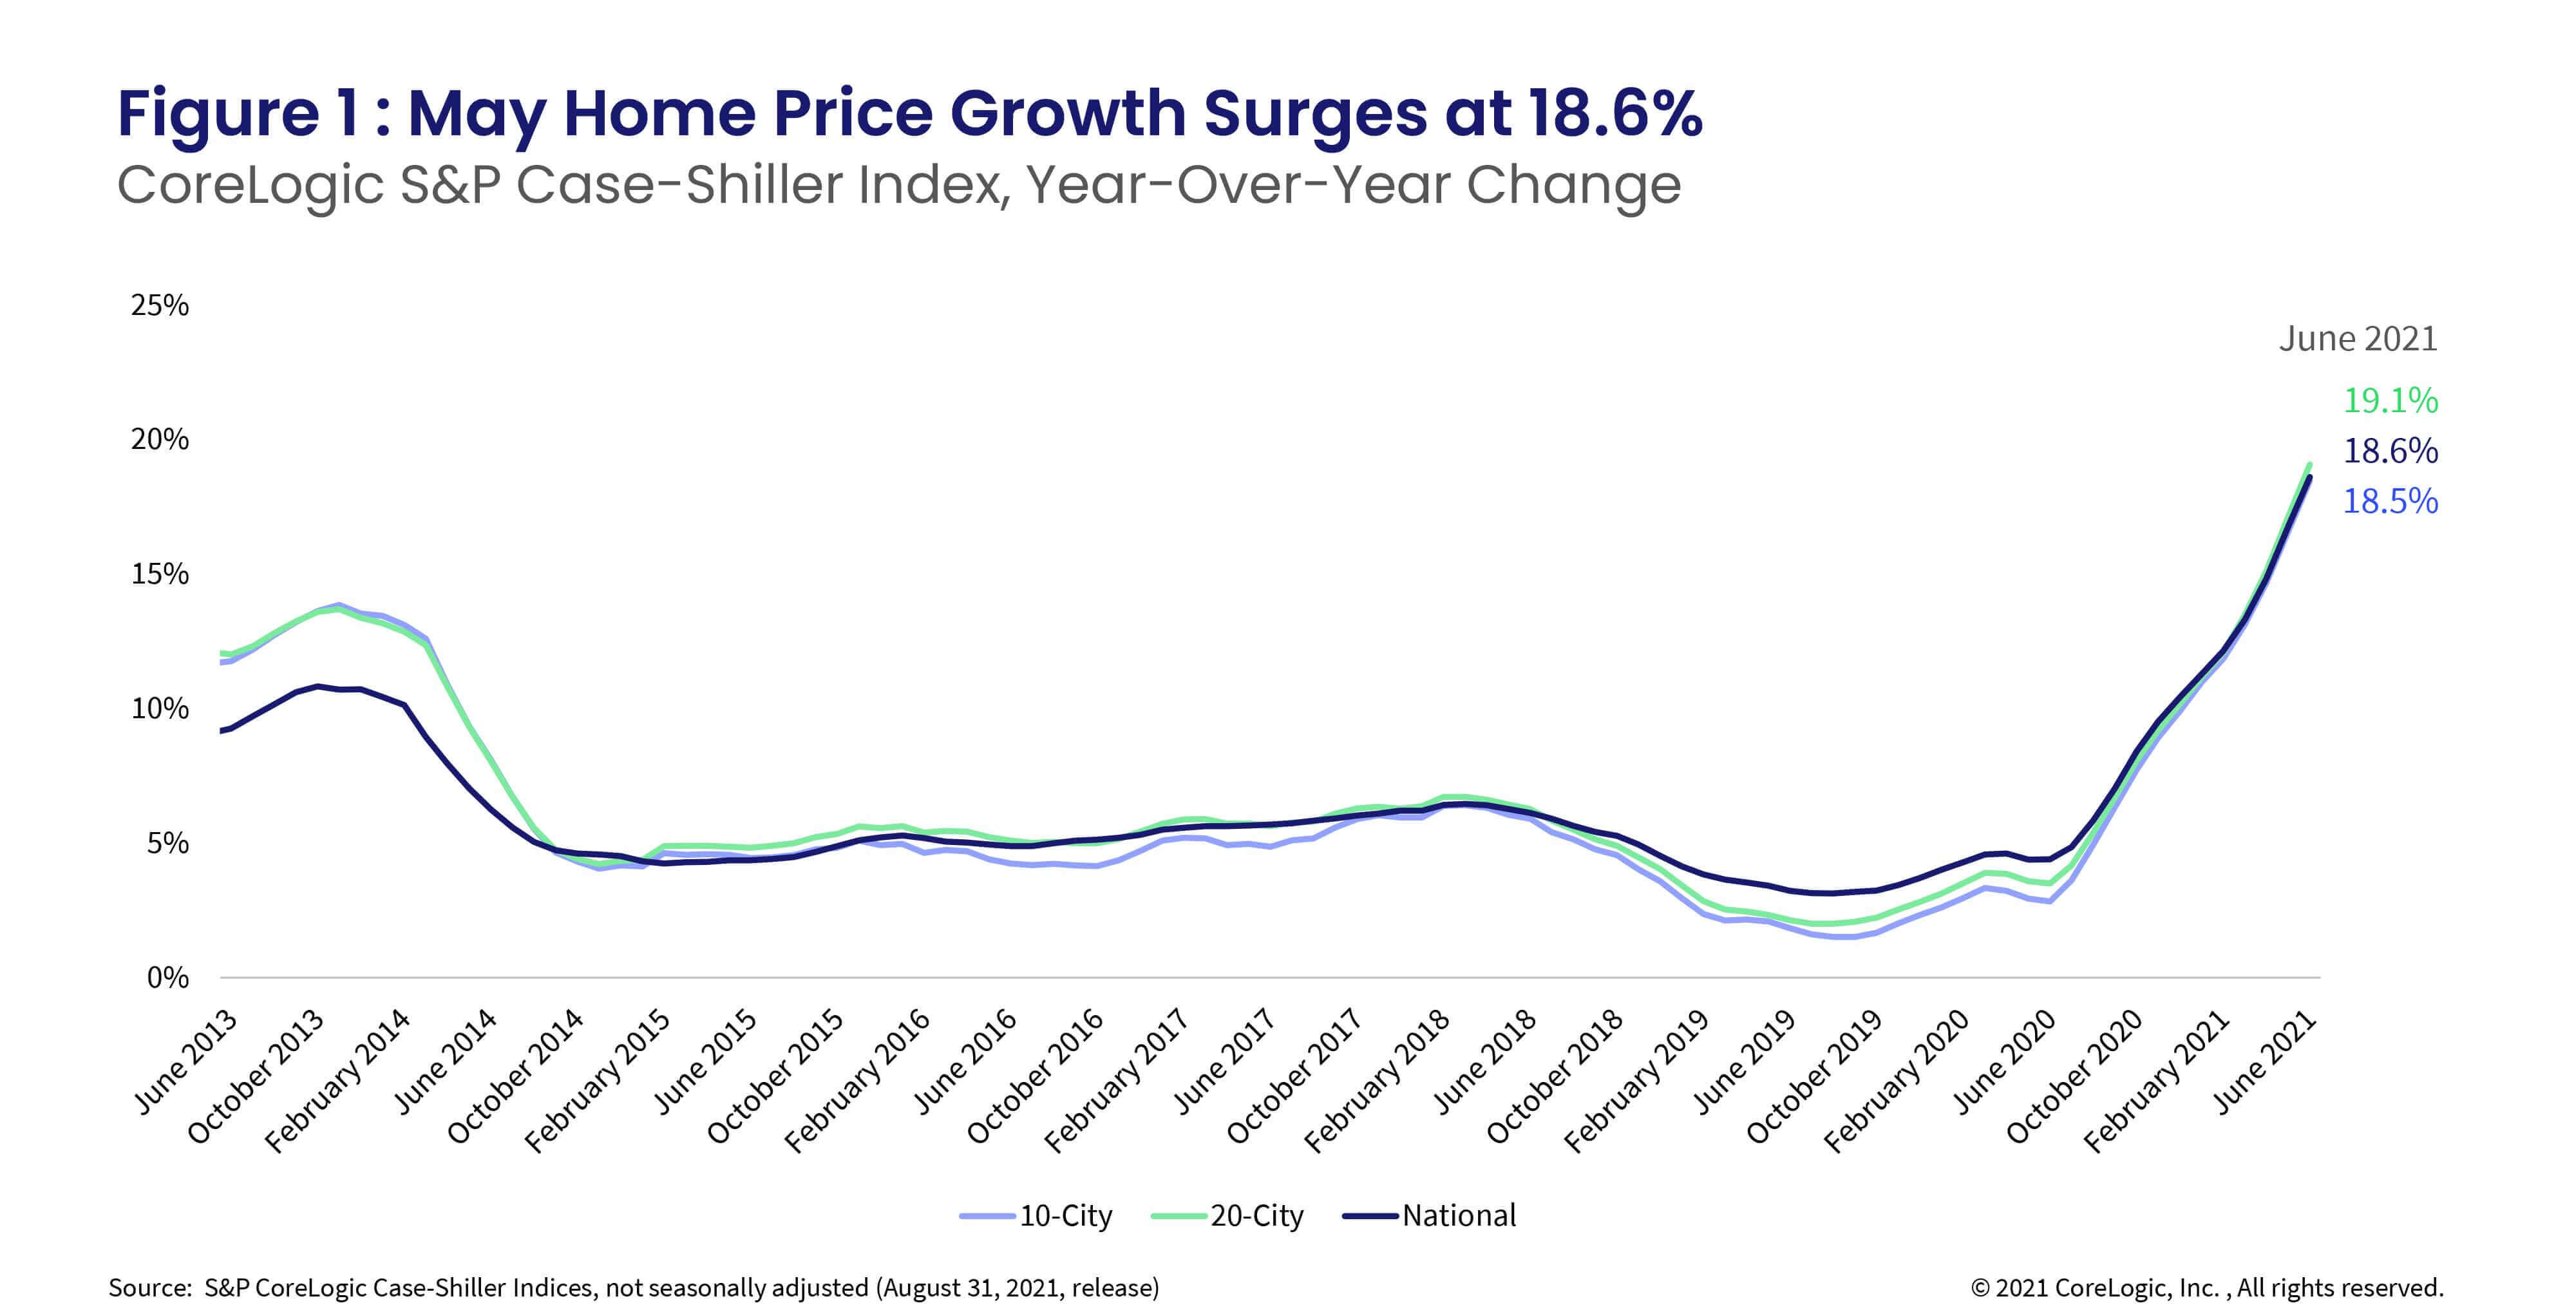 Figure 1 : May Home Price Growth Surges at 18.6%